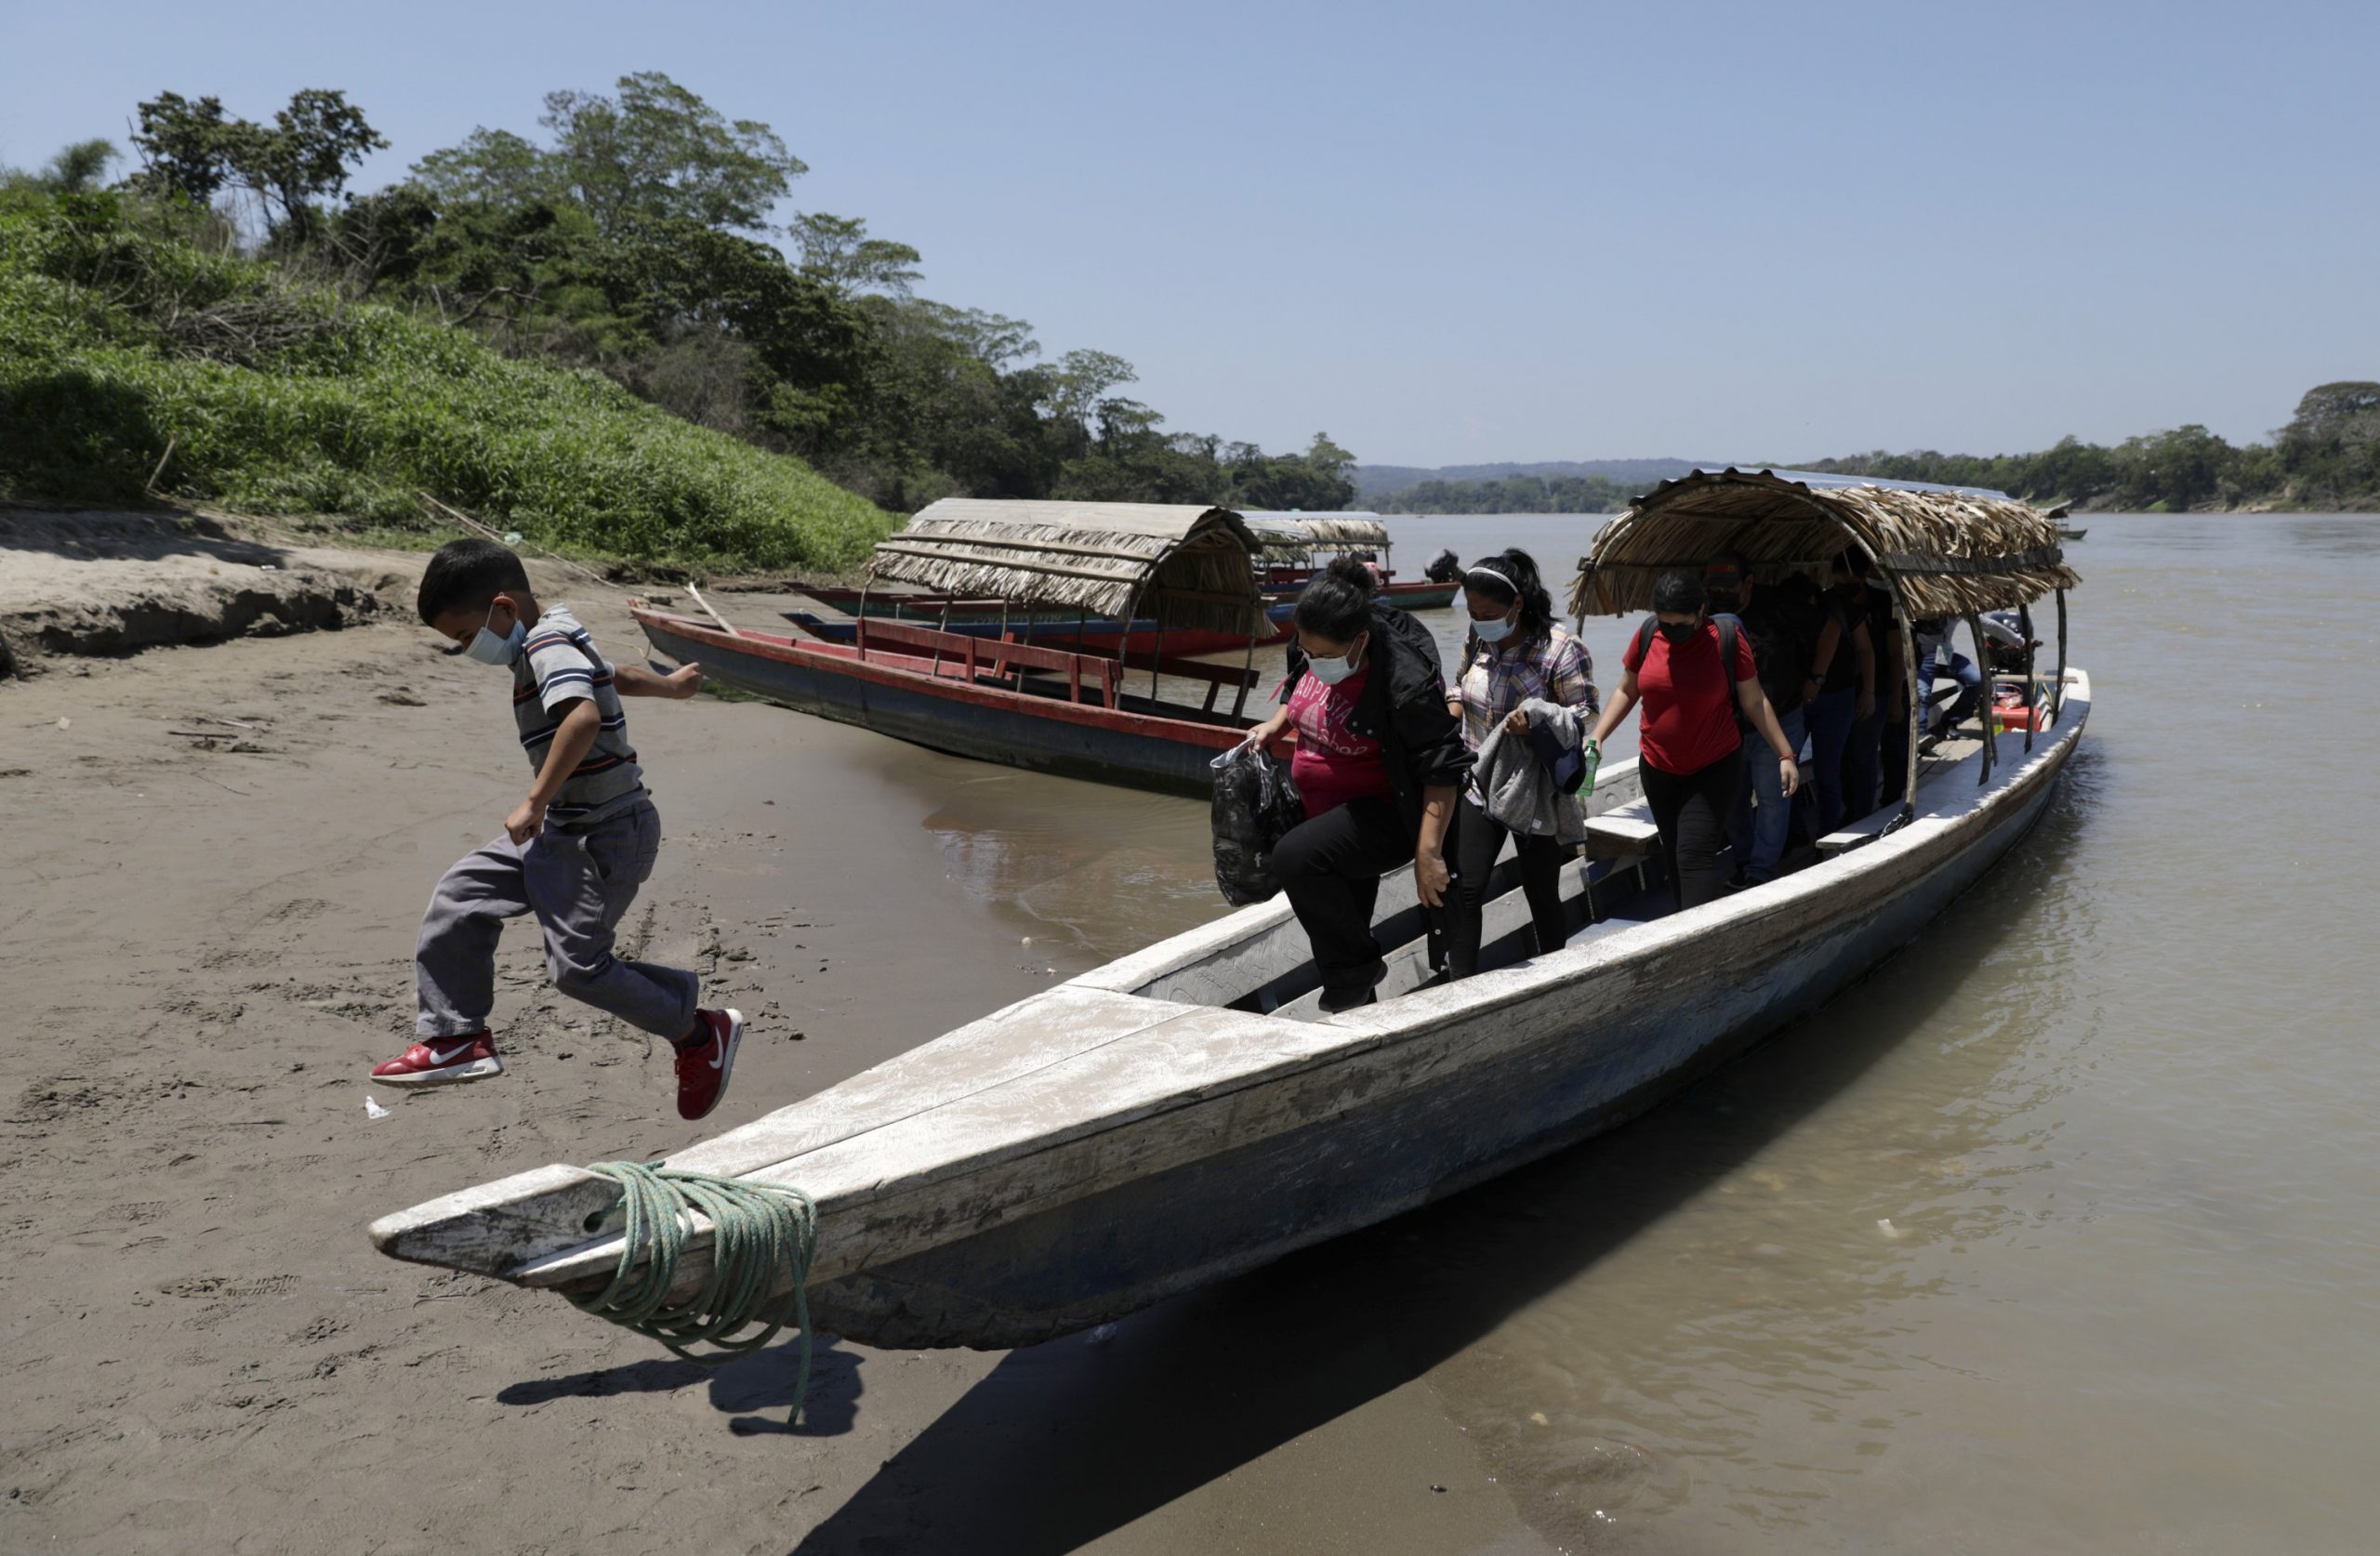 Guatemala announces emergency measures due to rumors of a new convoy